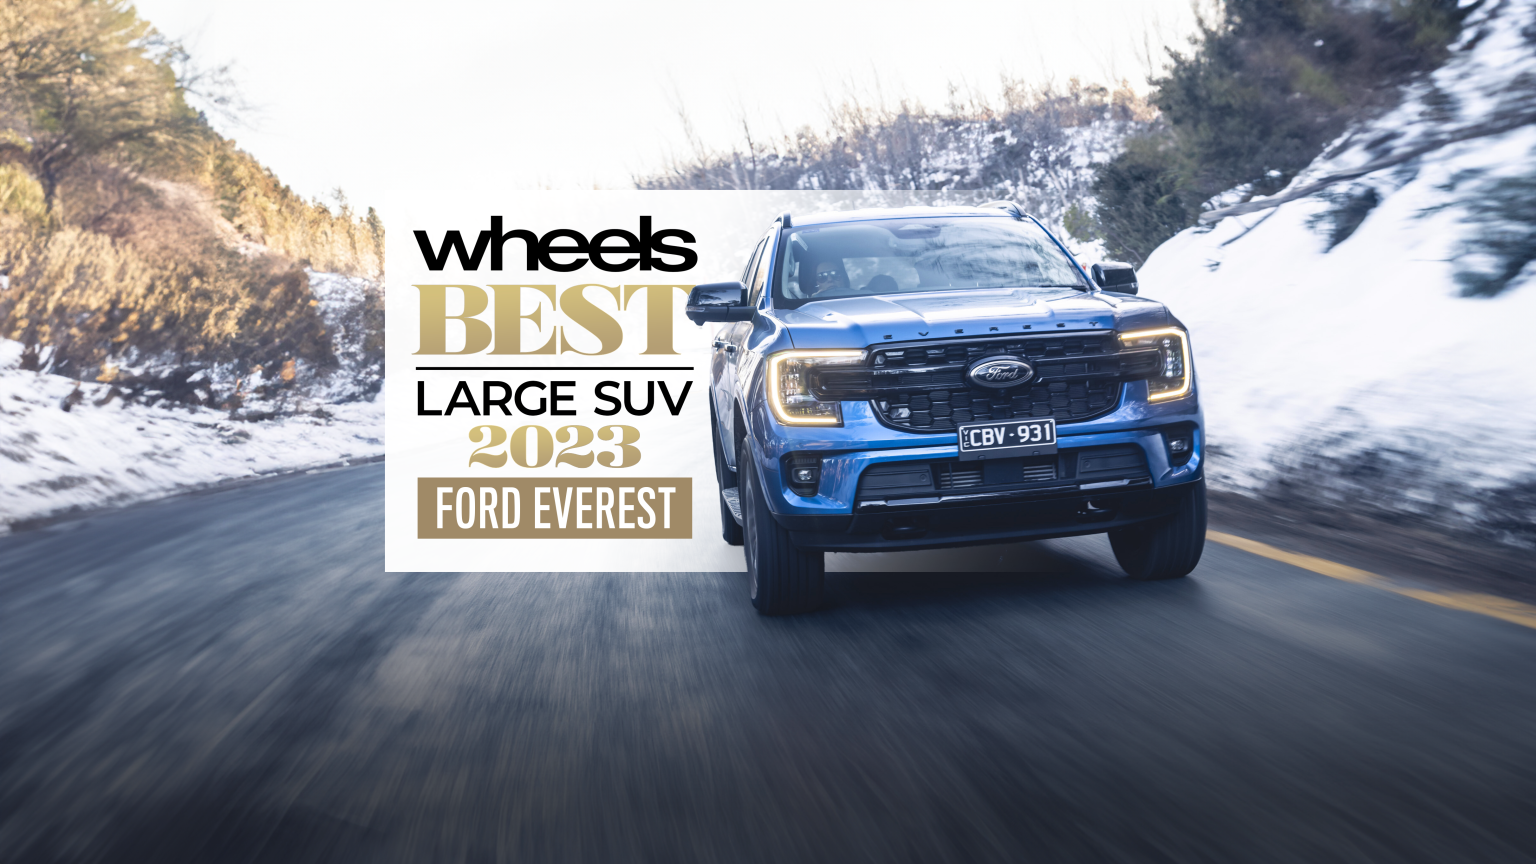 e36f19b5/2023 wheels best large suv overall ford everest png